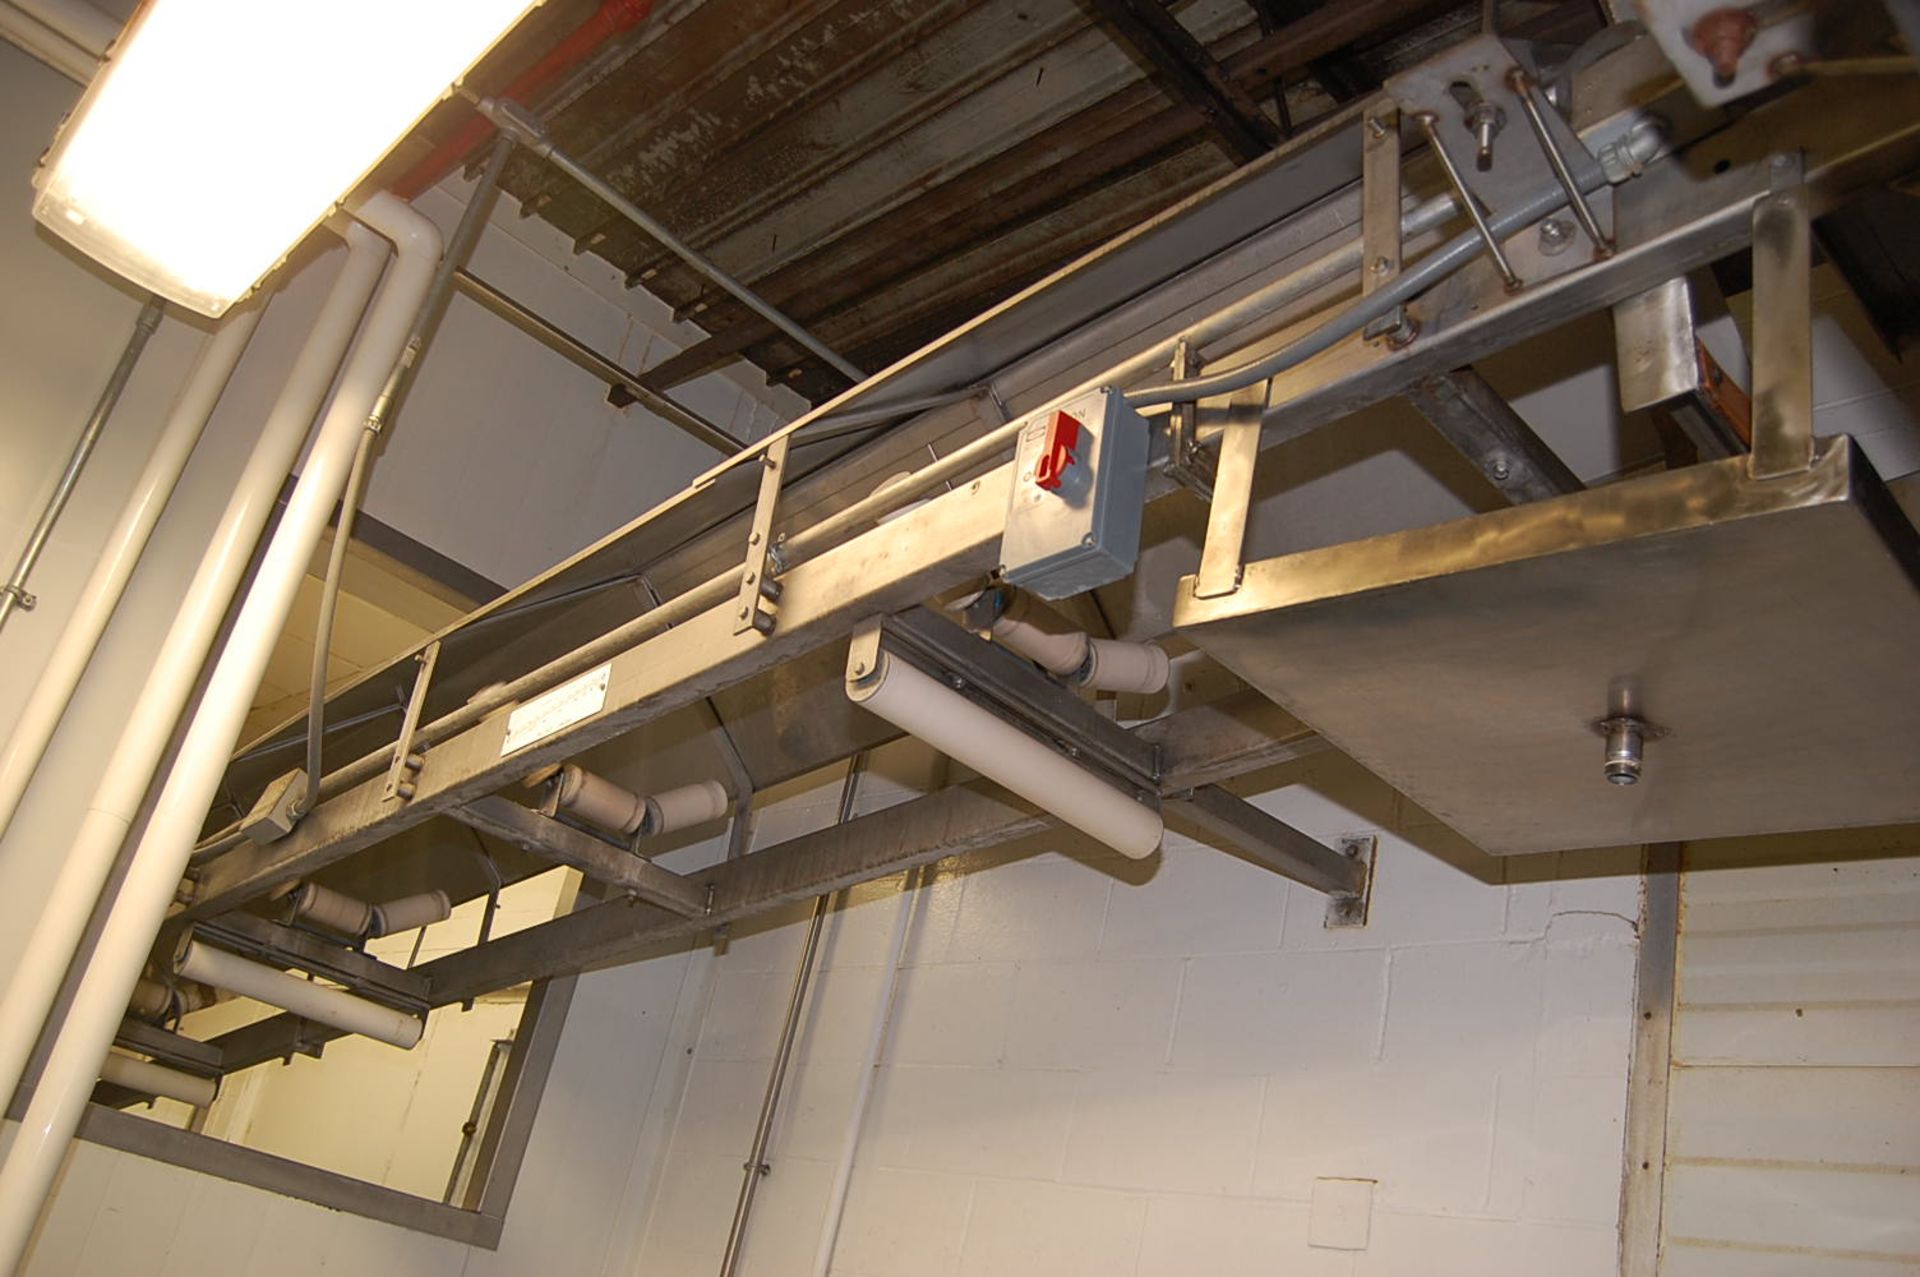 Conveyor - Motorized SS Incline Conveyor, Approx. 40 ft. Length x 20 in. Wide, 208-230/460 Volt - Image 4 of 4